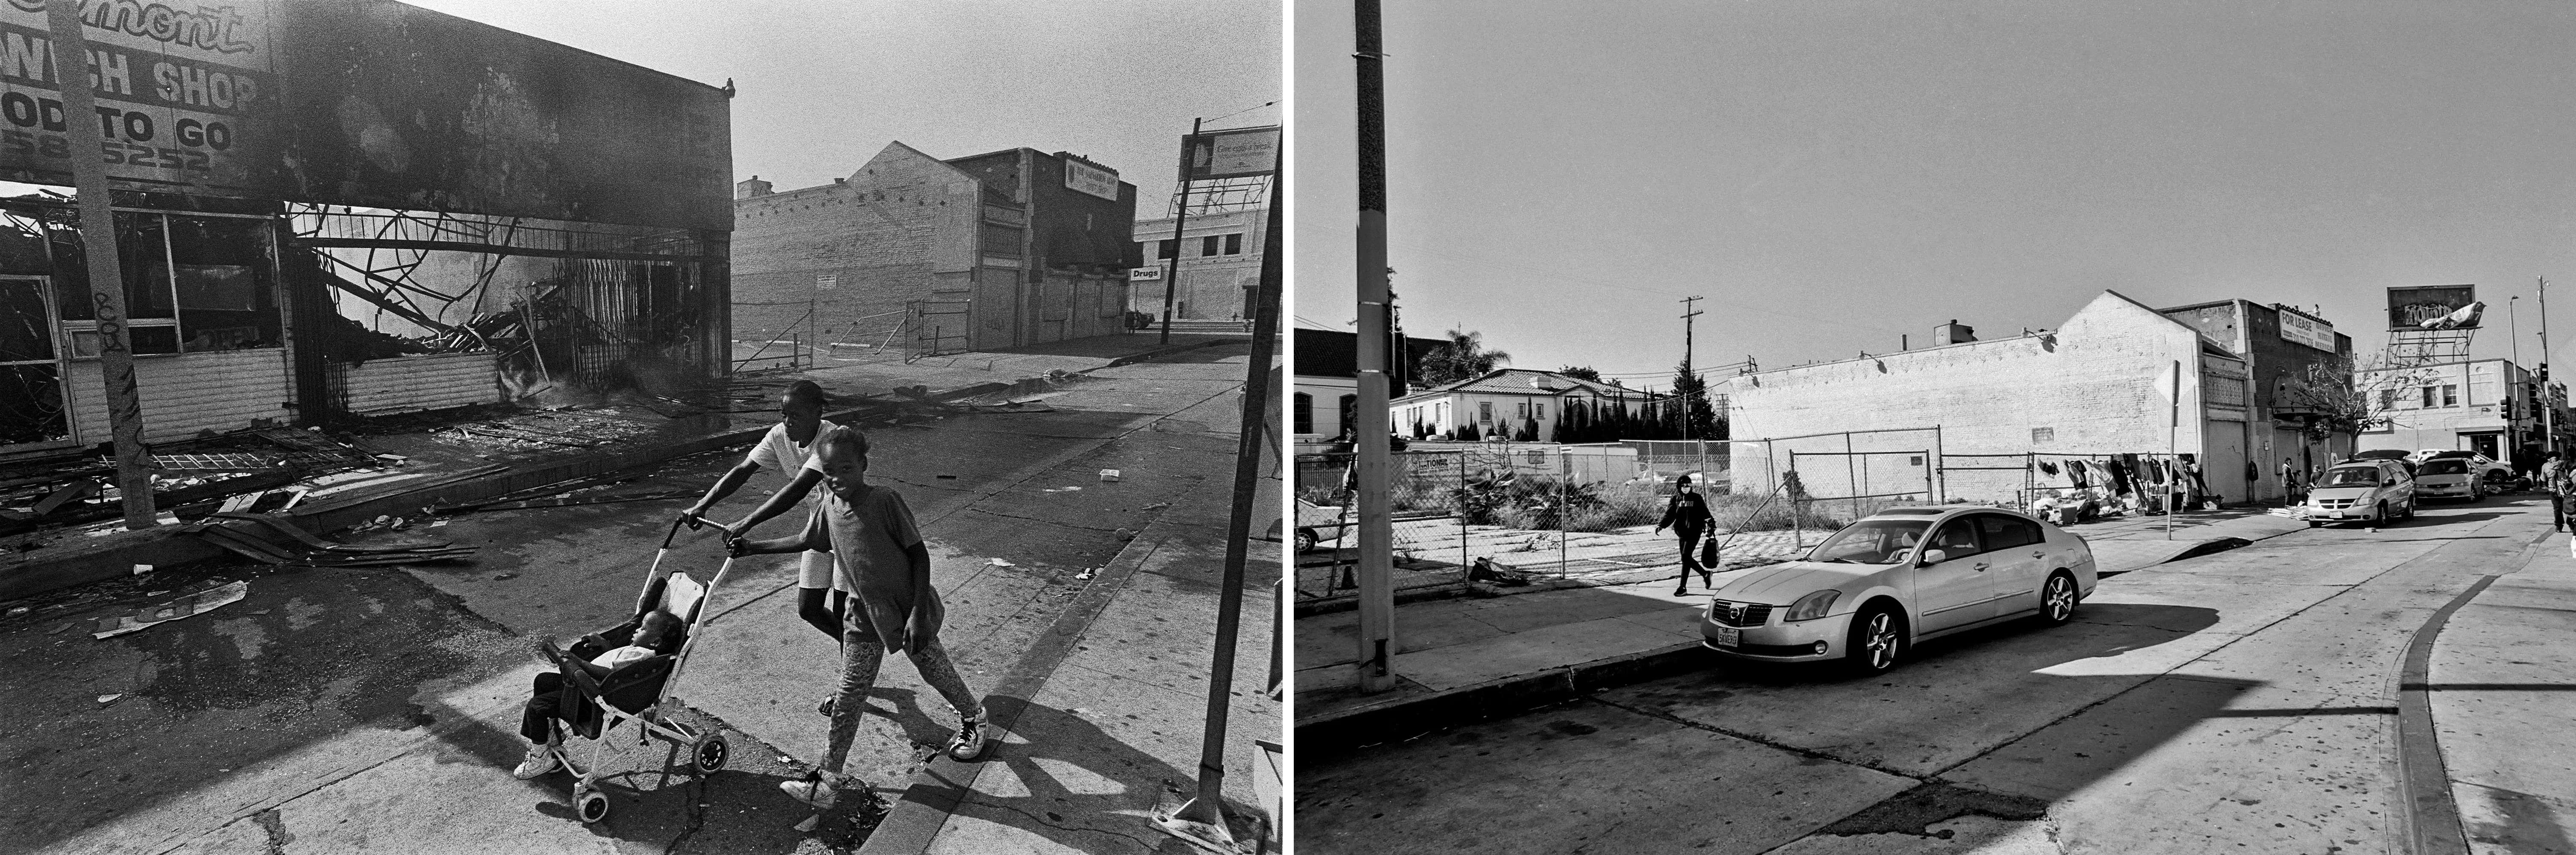 Two pictures are shown side by side: On the left, two people push a stroller past burnt buildings; on the right, buildings aren